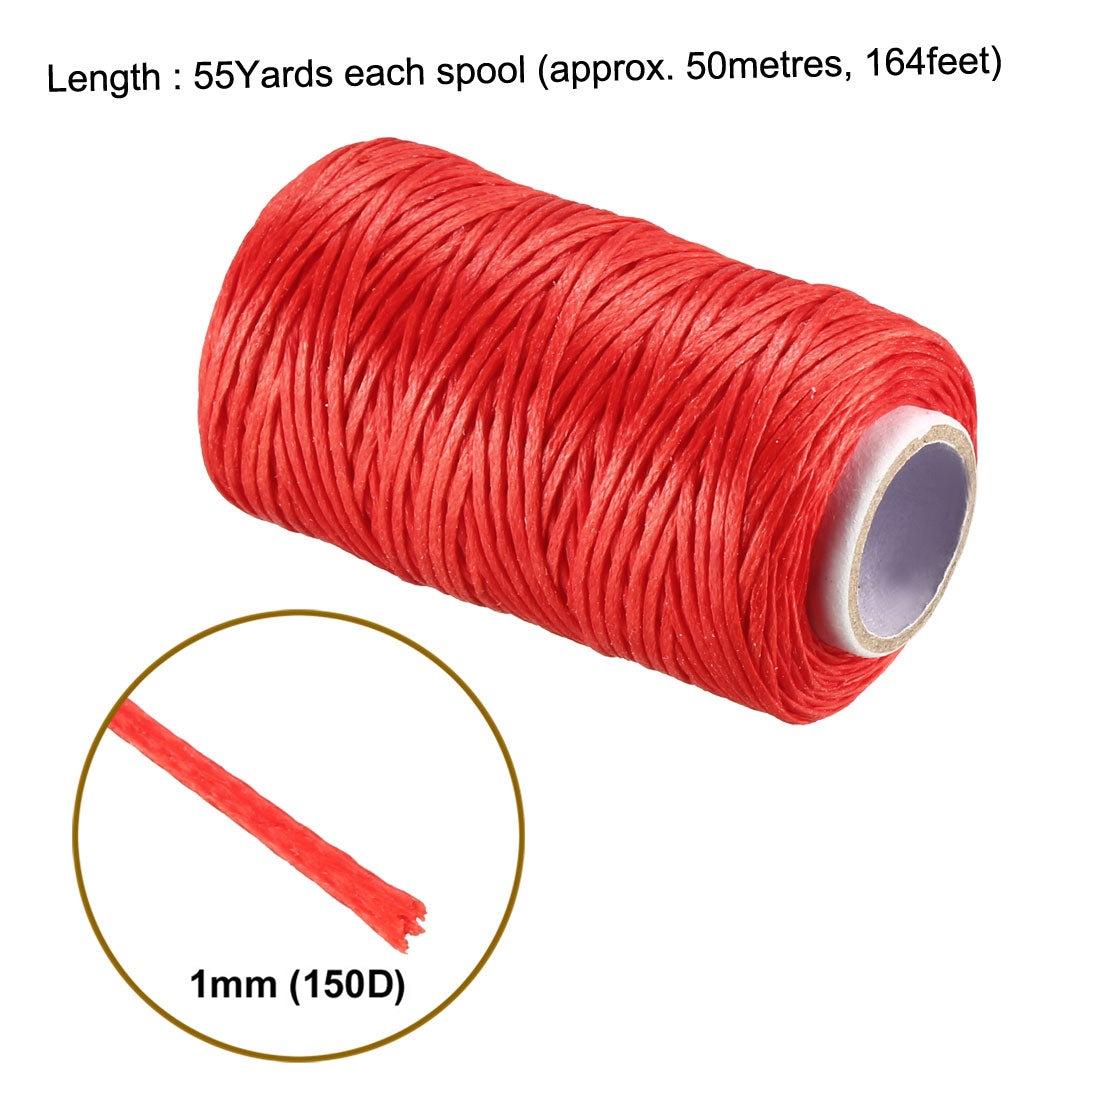 Uxcell Uxcell Crafts 150D 1mm Leather Sewing Stitching Flat Waxed Thread String Cord (150D 1mm 50M, Fuchsia )